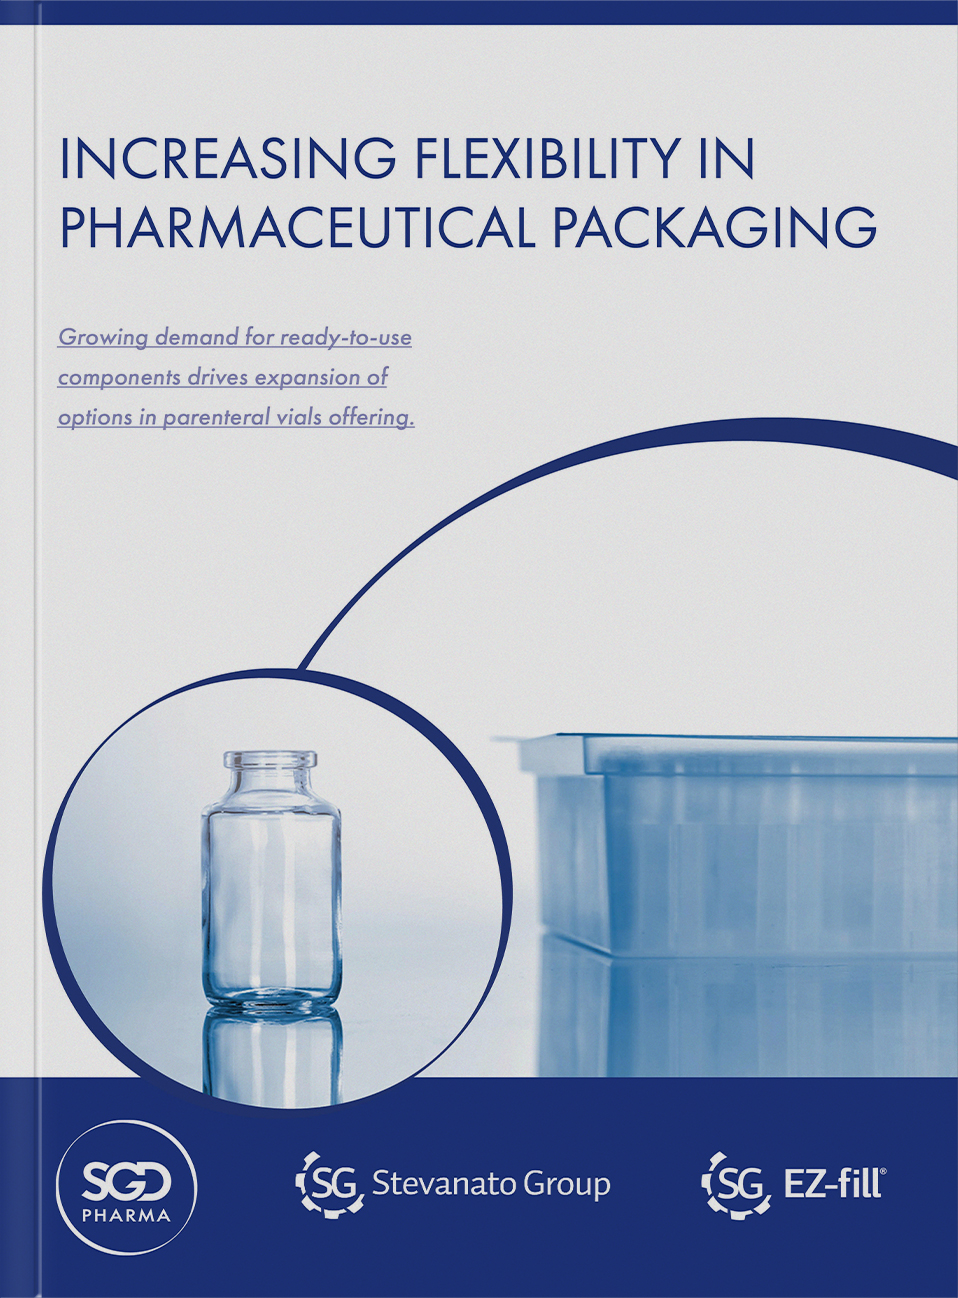 Increasing flexibility in pharmaceutical packaging for aseptic filling